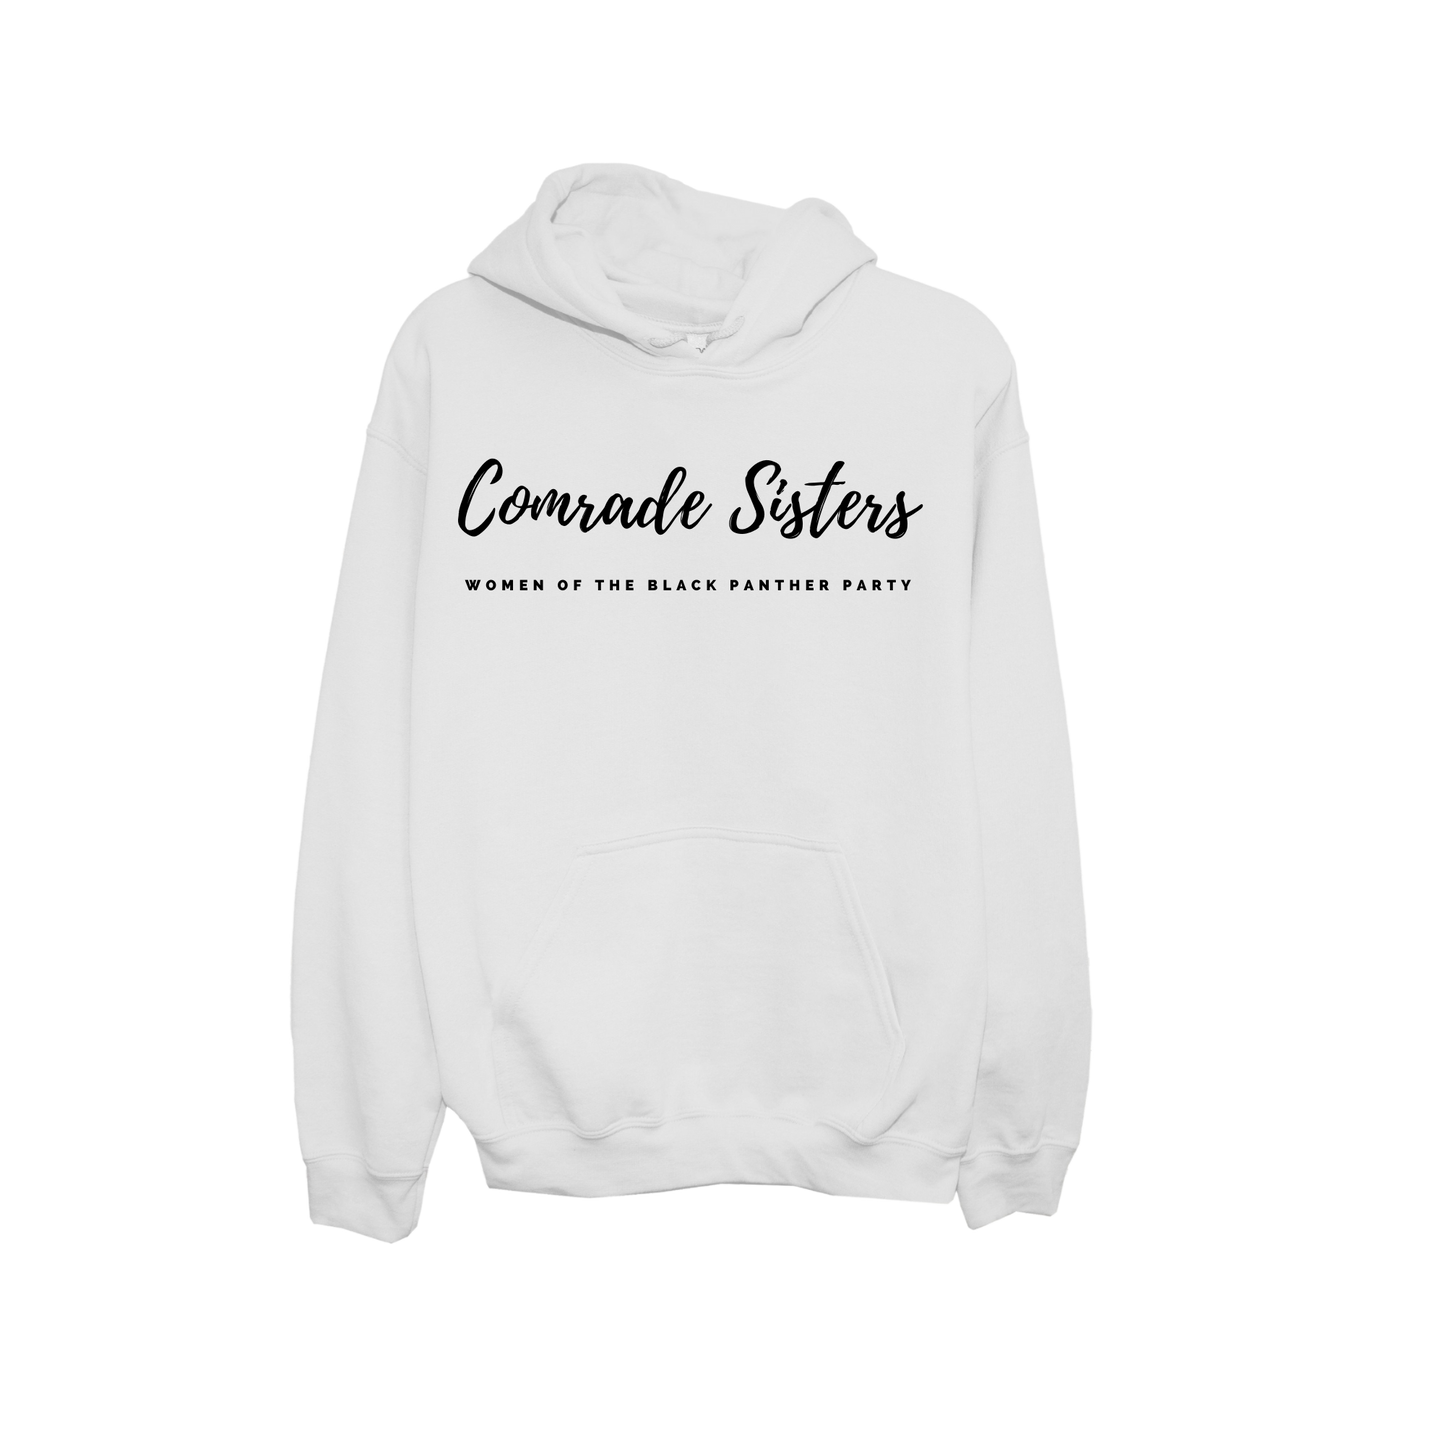 EXCLUSIVE Commemorative Comrade Sisters Women of the Black Panther Party Hoodie